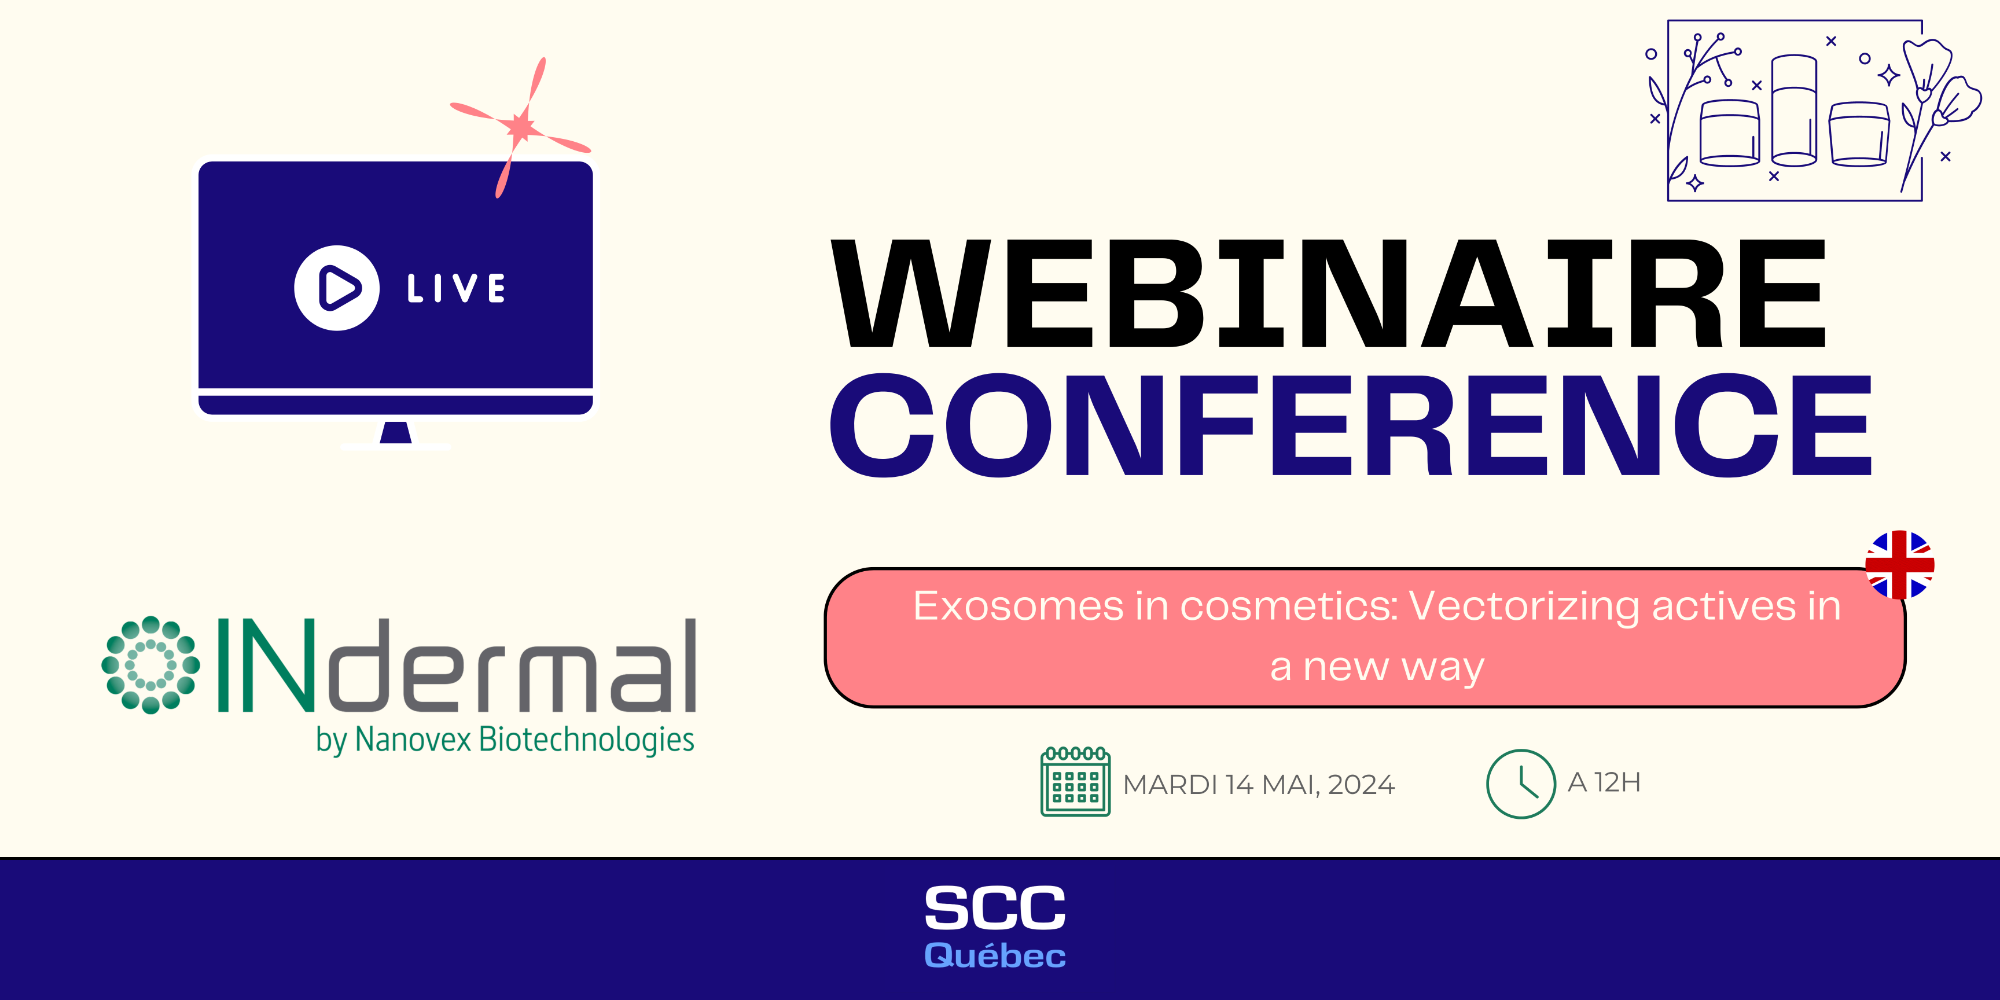 Webinaire: Exosomes in cosmetics, vectorizing actives in a new way